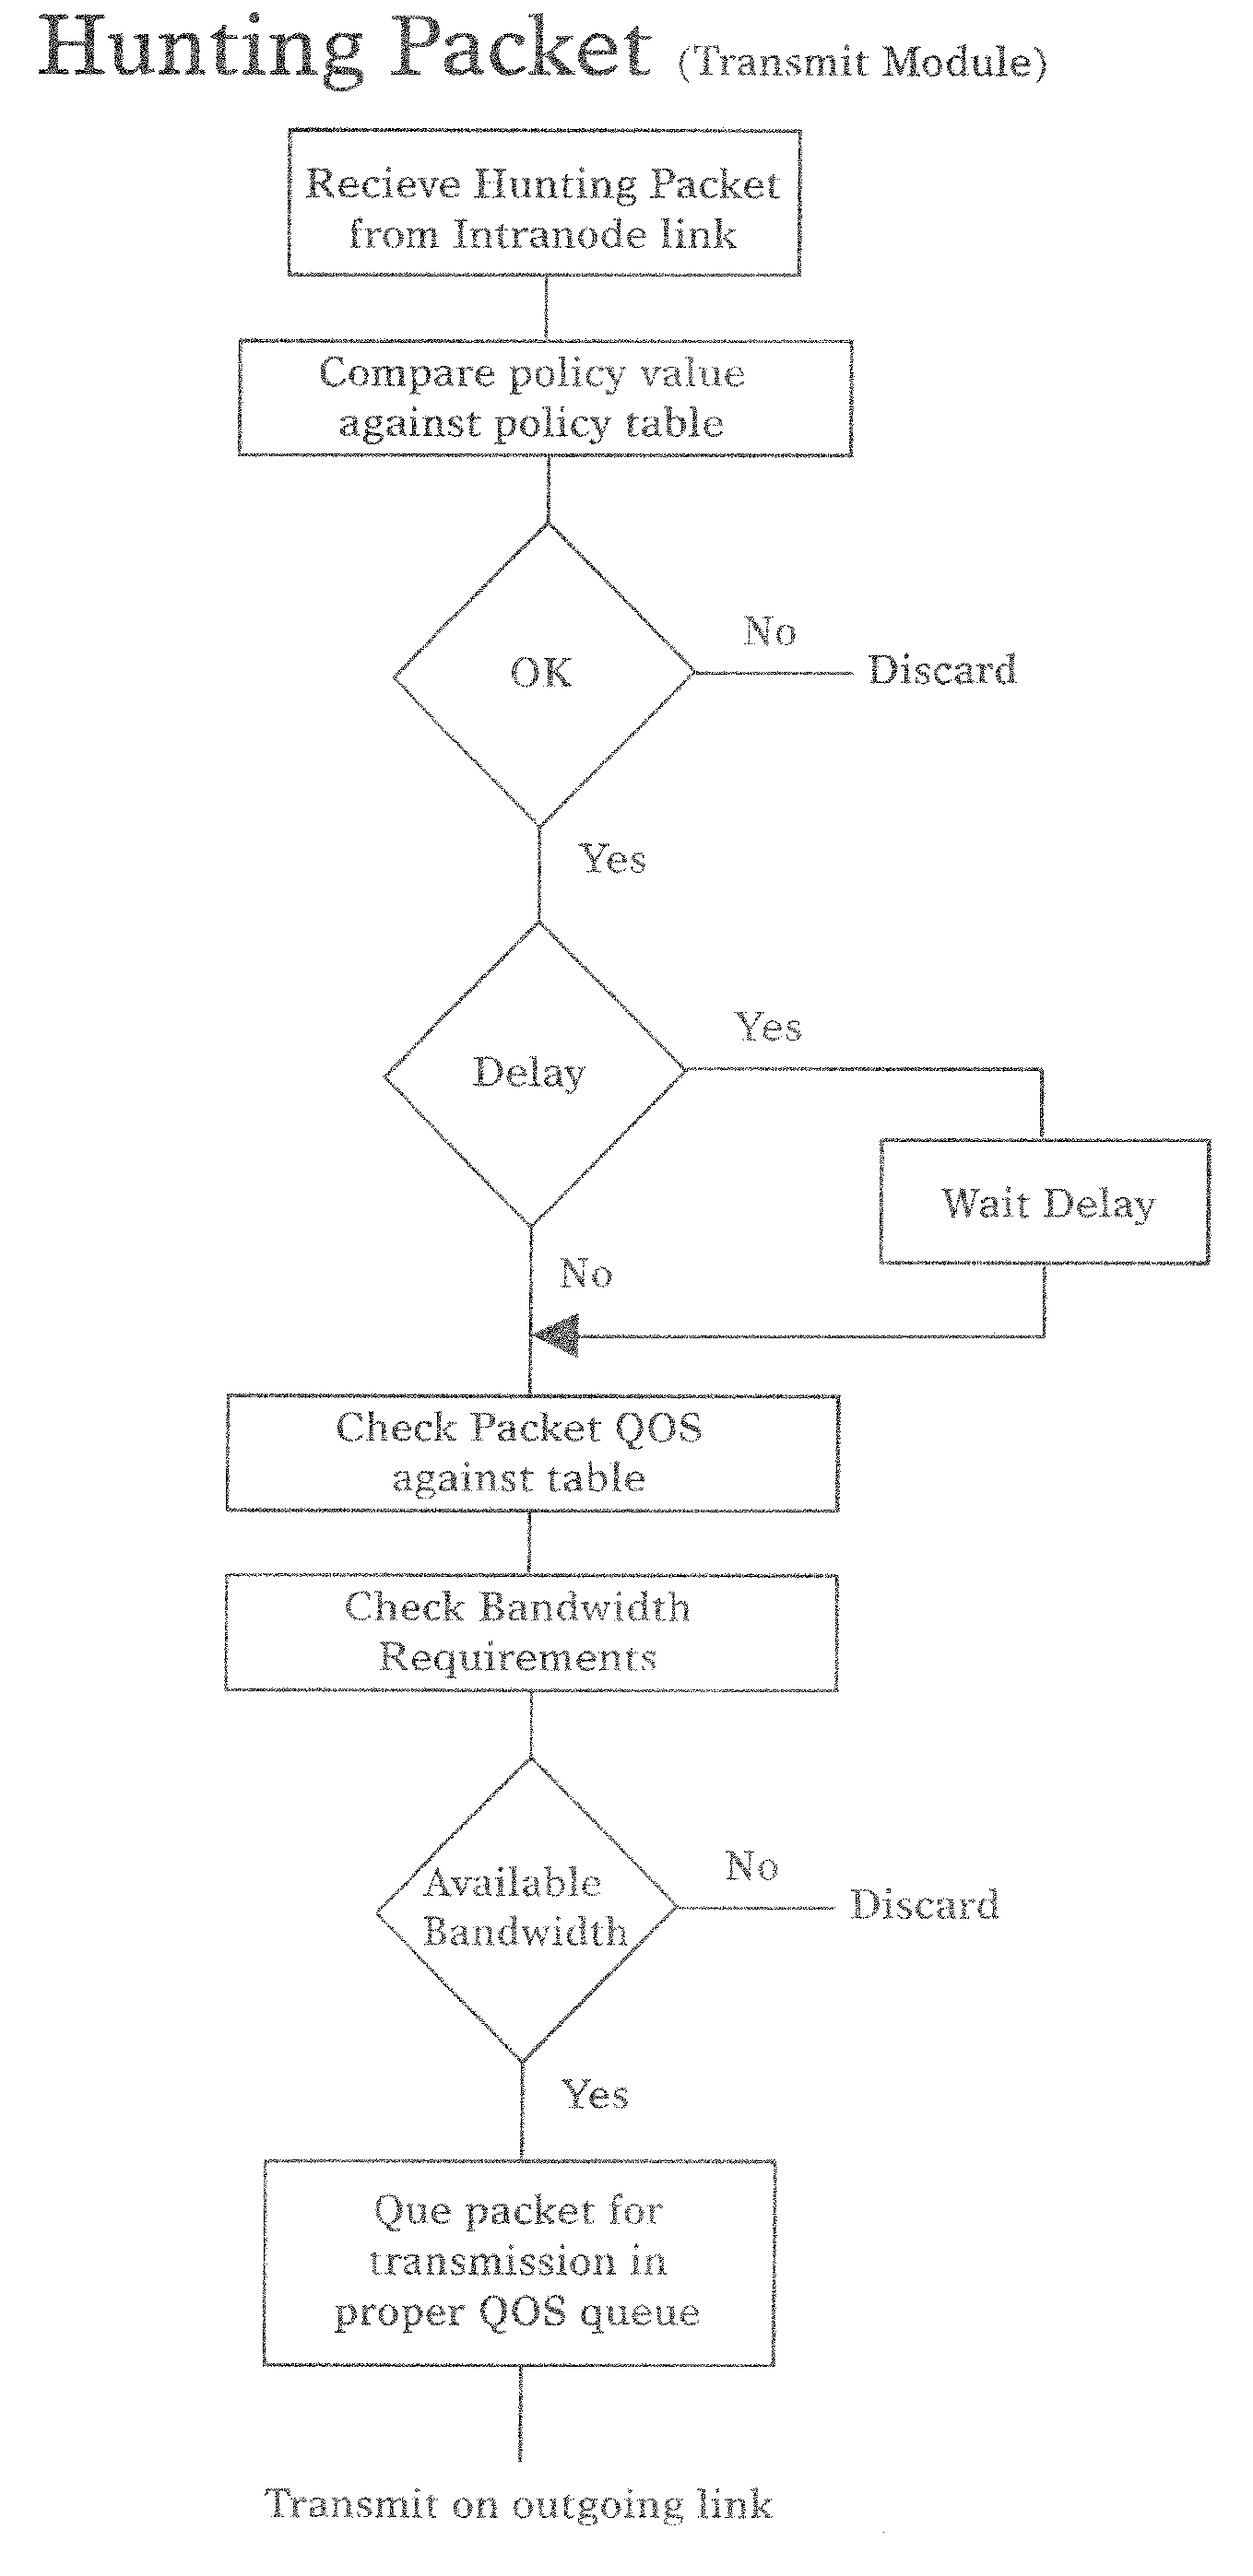 Self-routed layer 4 packet network system and method